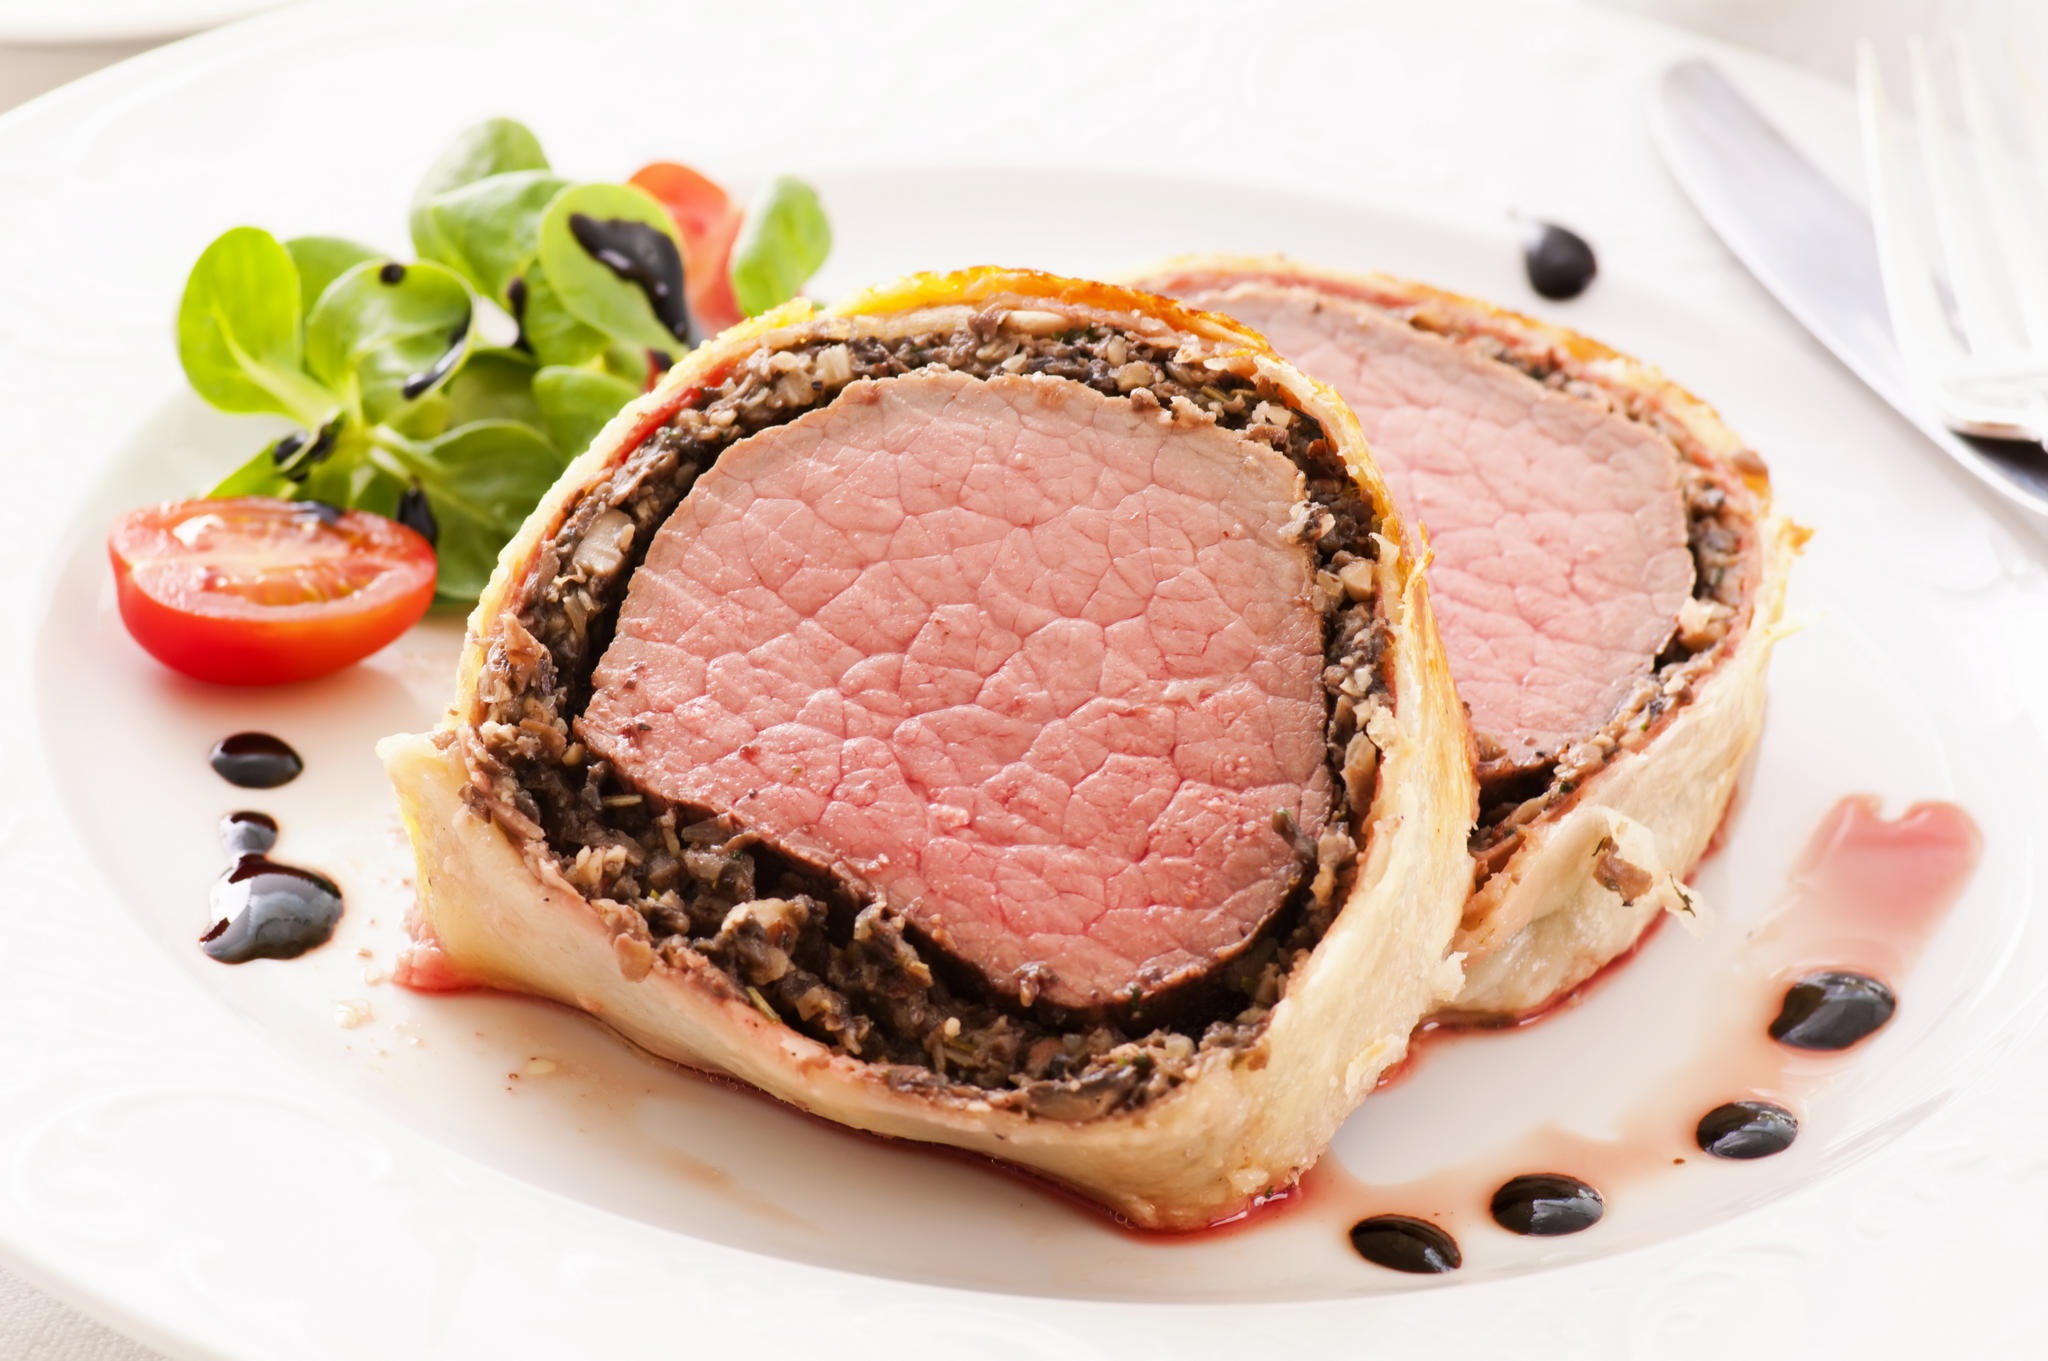 Beef Wellington is an English pie made of fillet steak